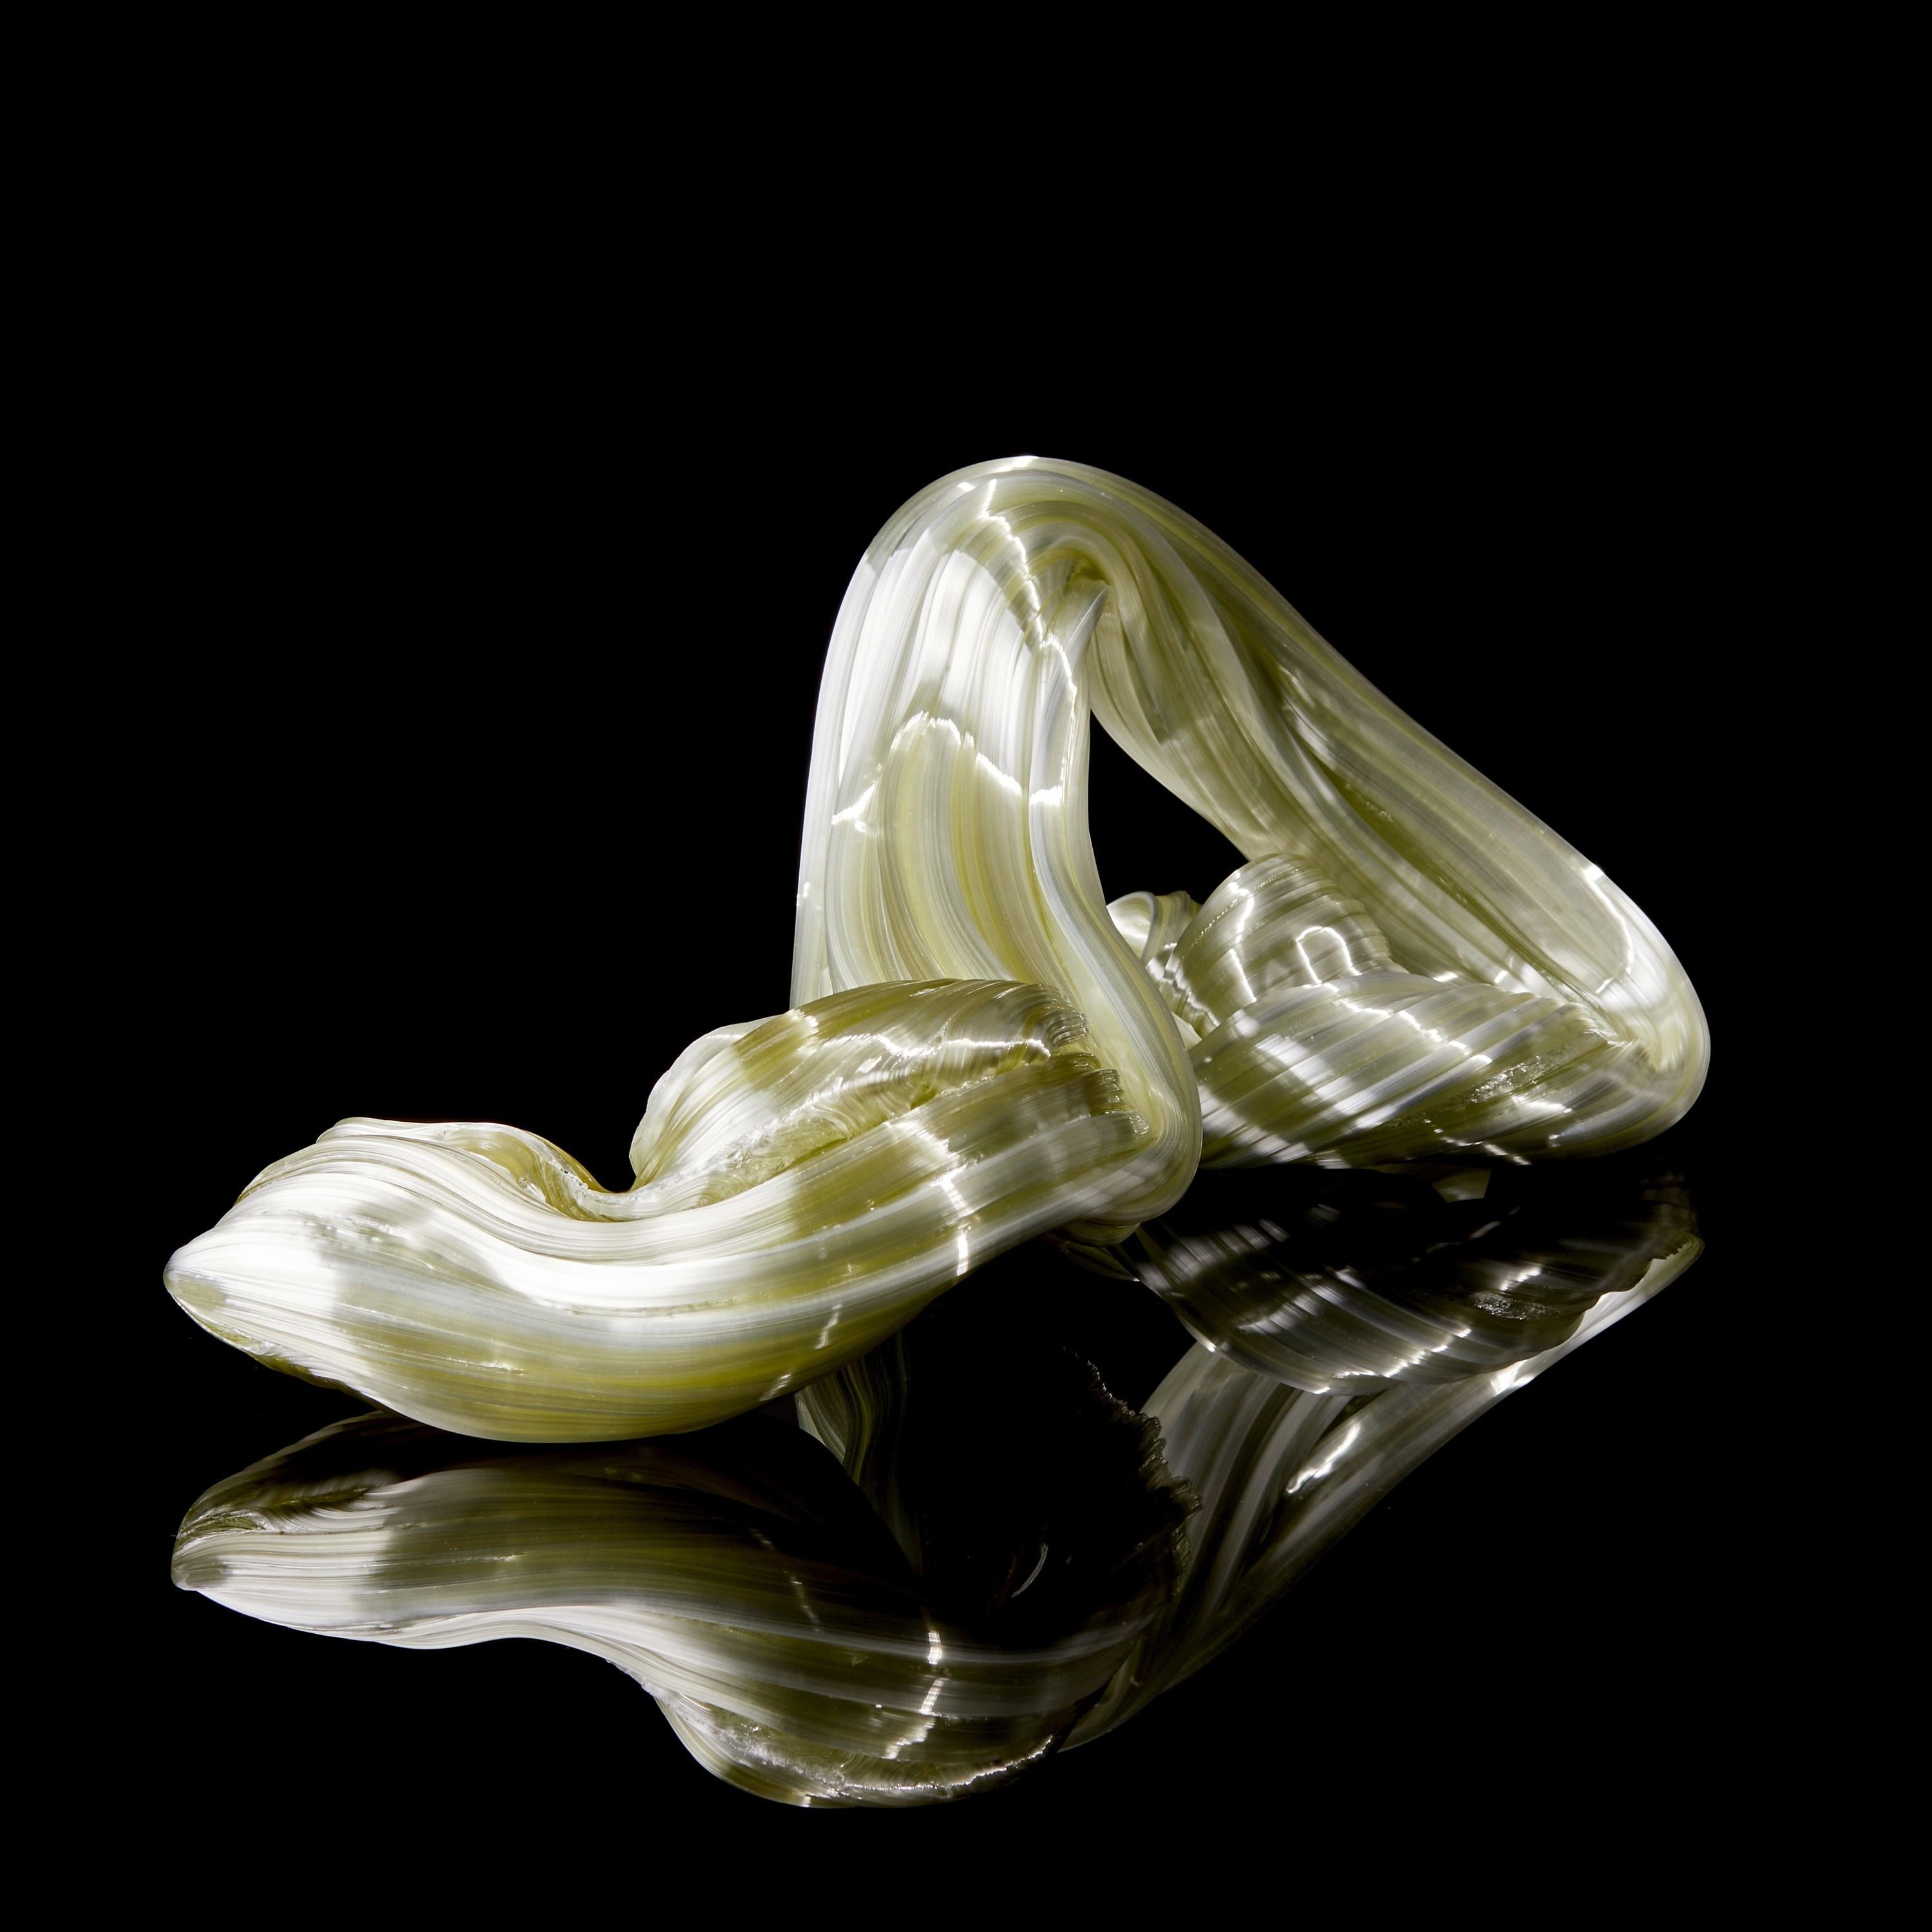 Hand-Crafted Nonlinear in Green II, Unique Light Green Glass Sculpture by Maria Bang Espersen